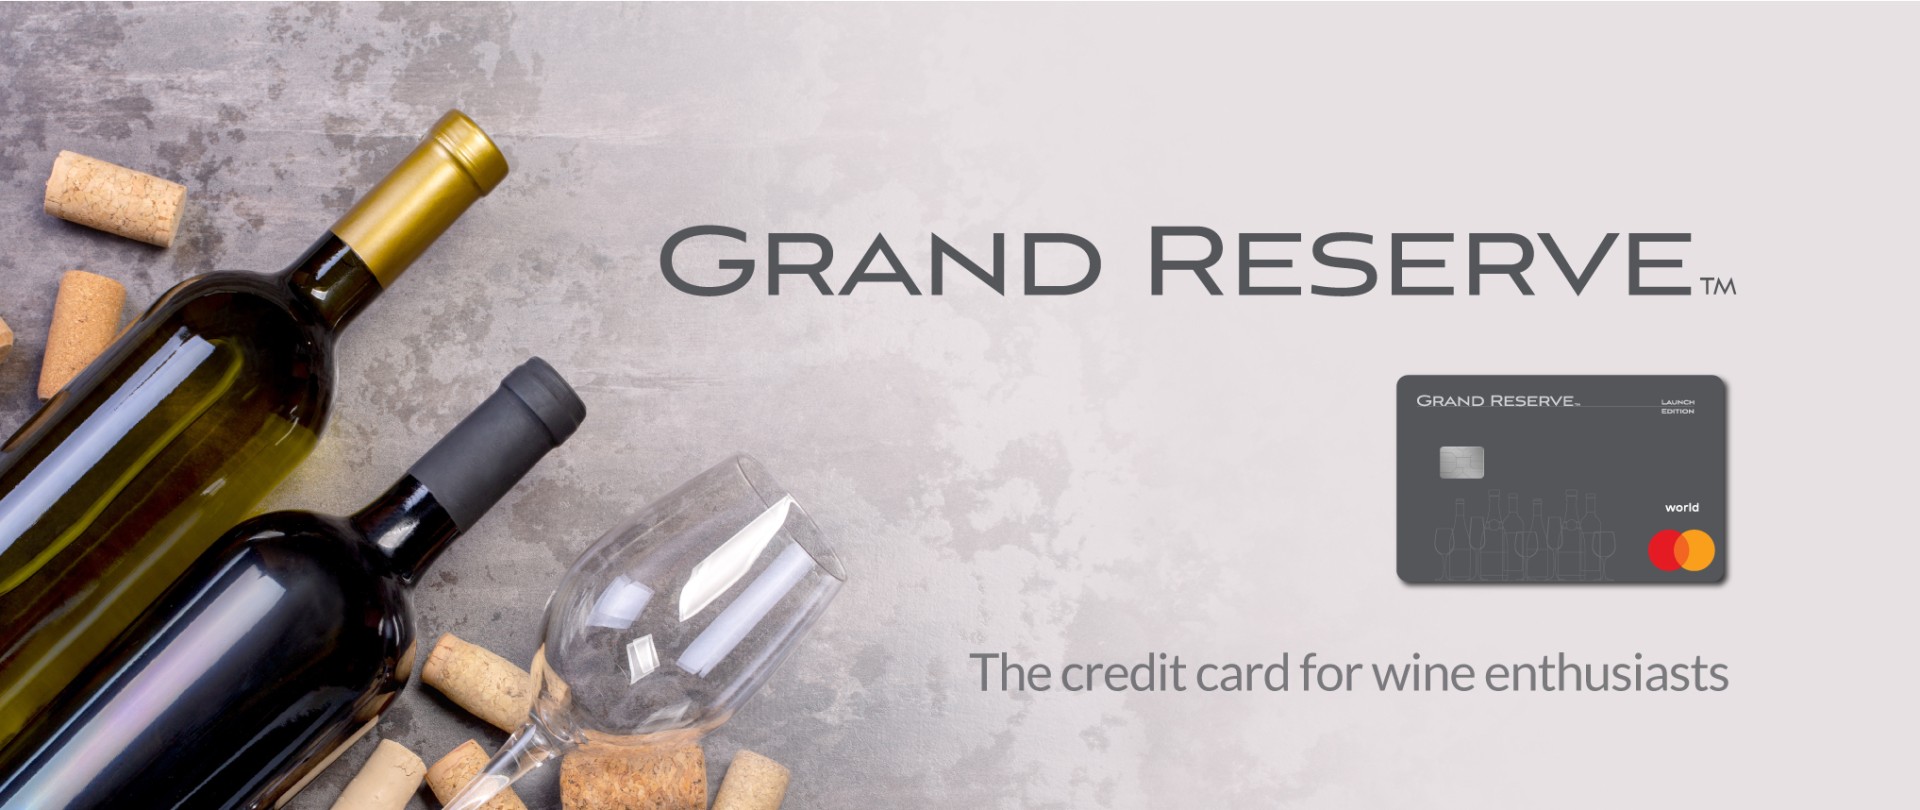 Vertical Finance Launches Waitlist for Grand Reserve World Mastercard for Wine Enthusiasts